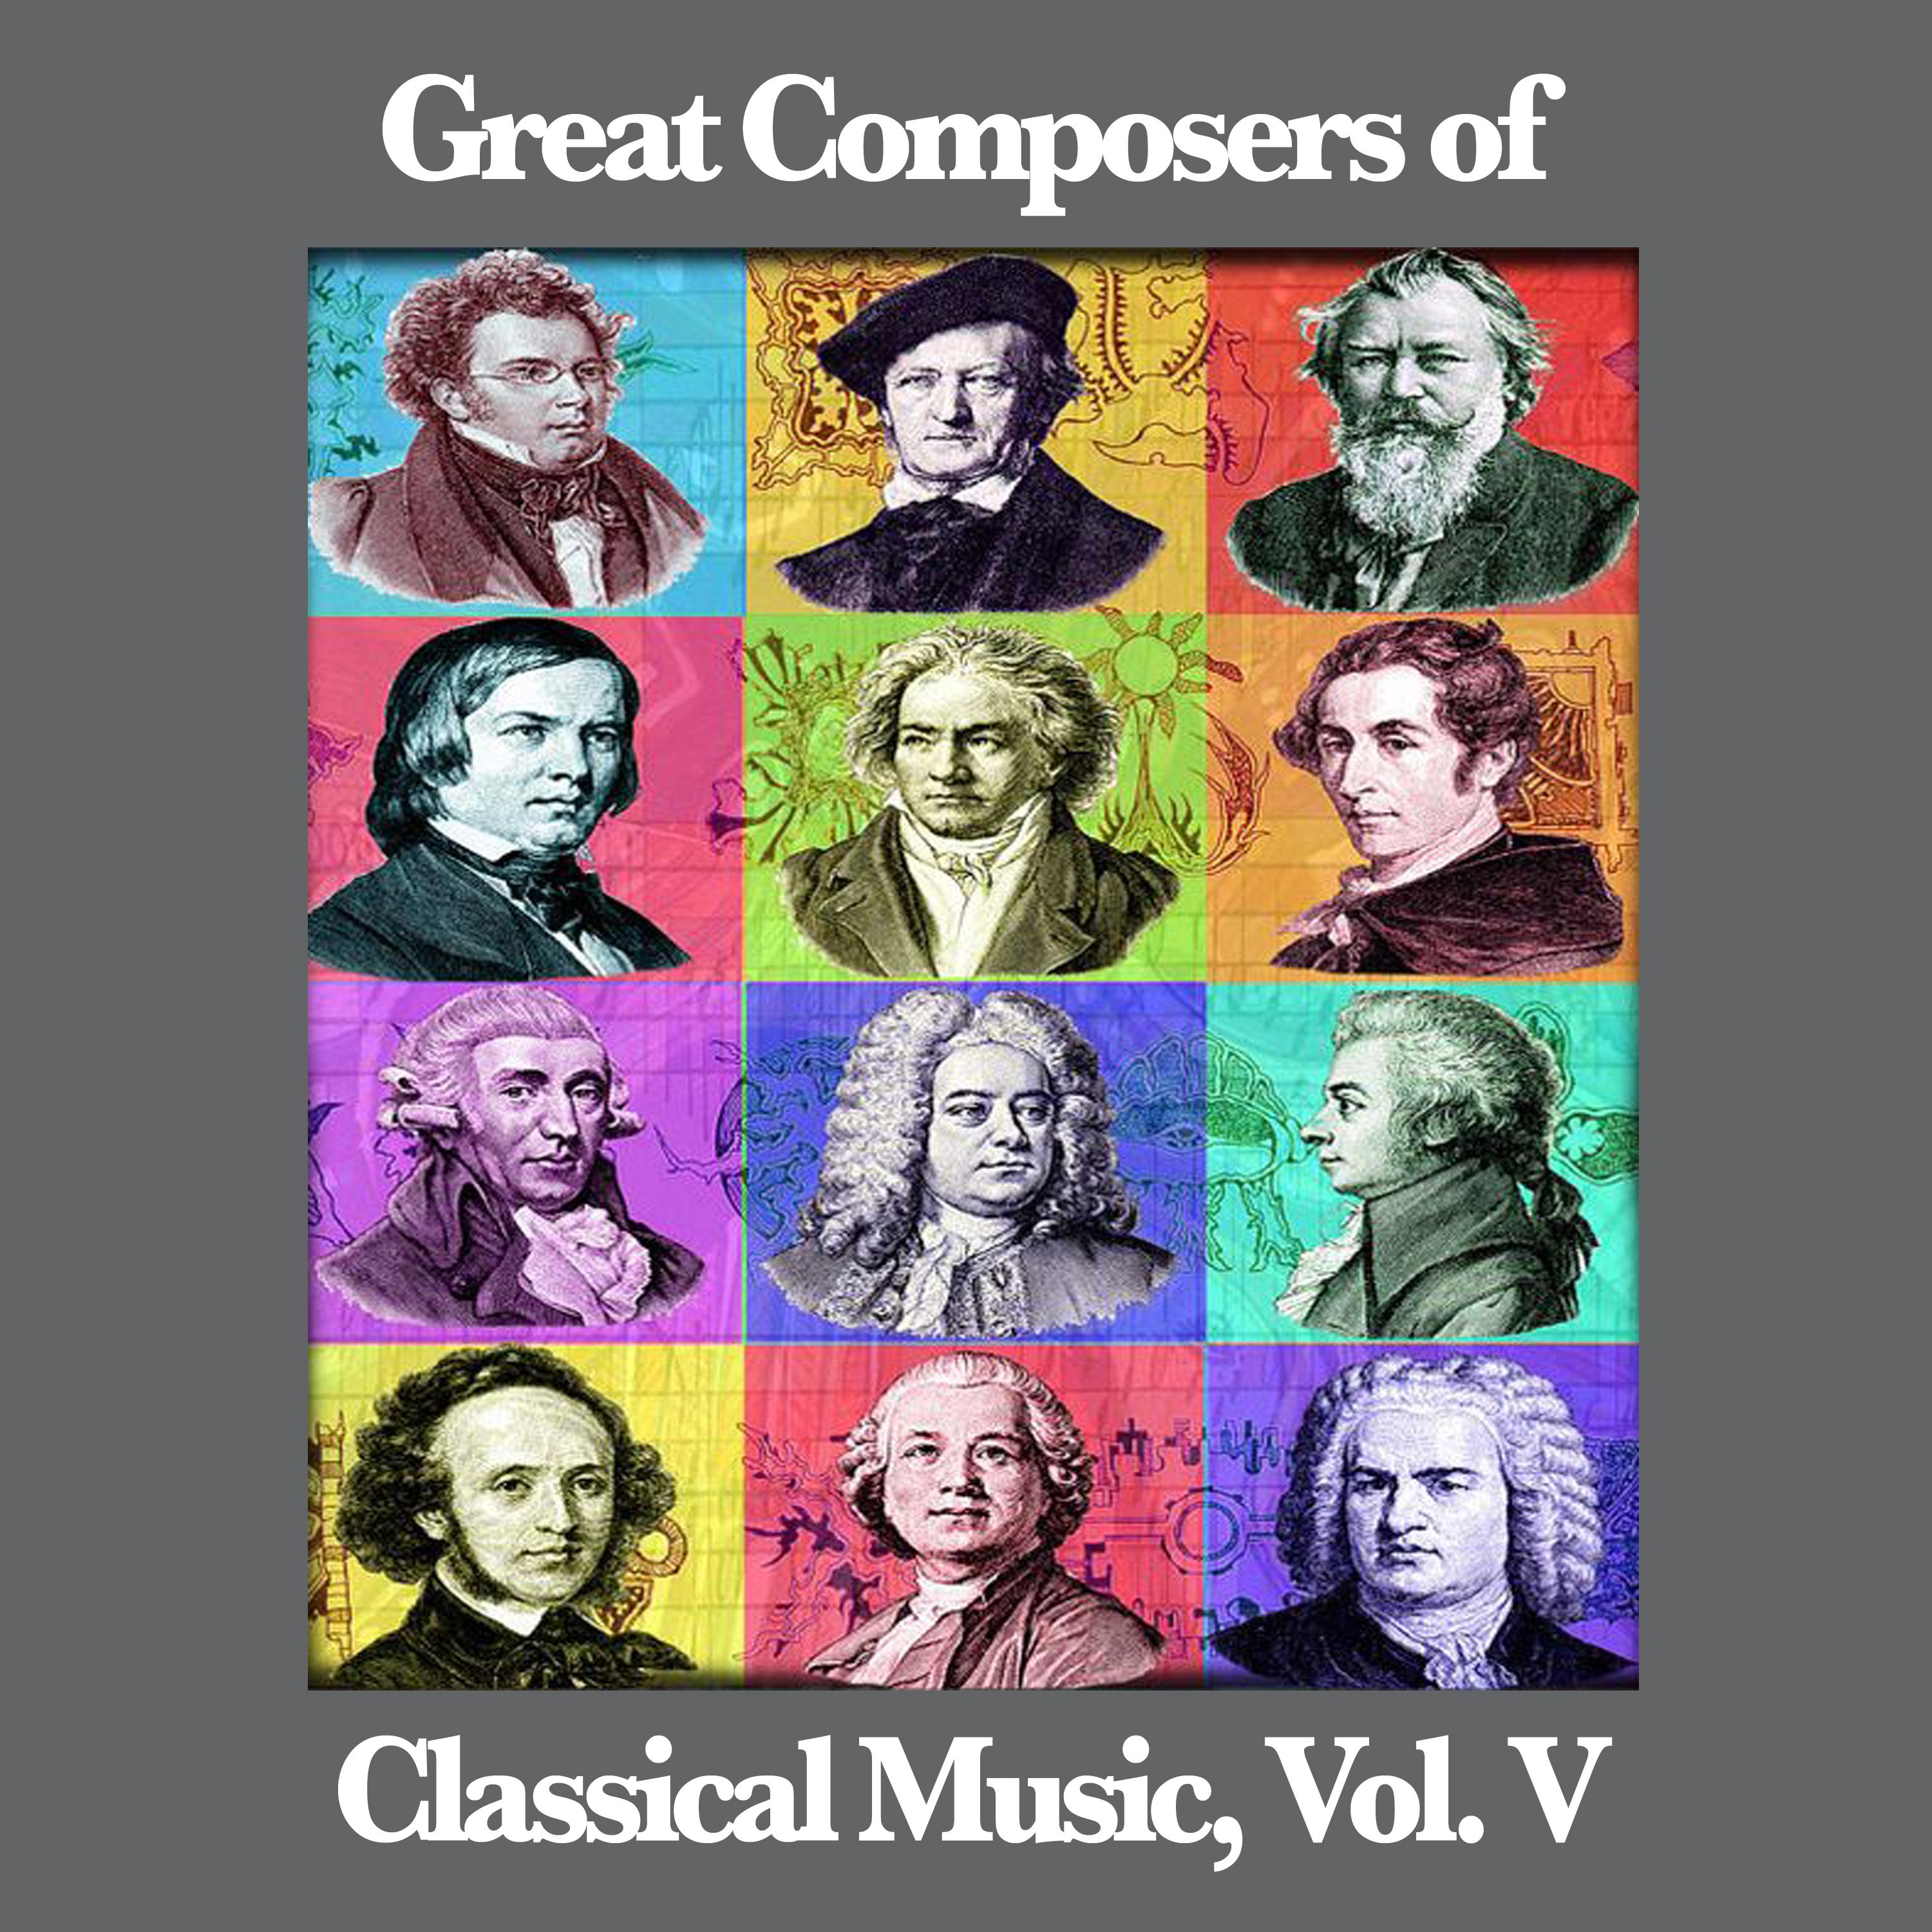 Great Composers of Classical Music, Vol. V